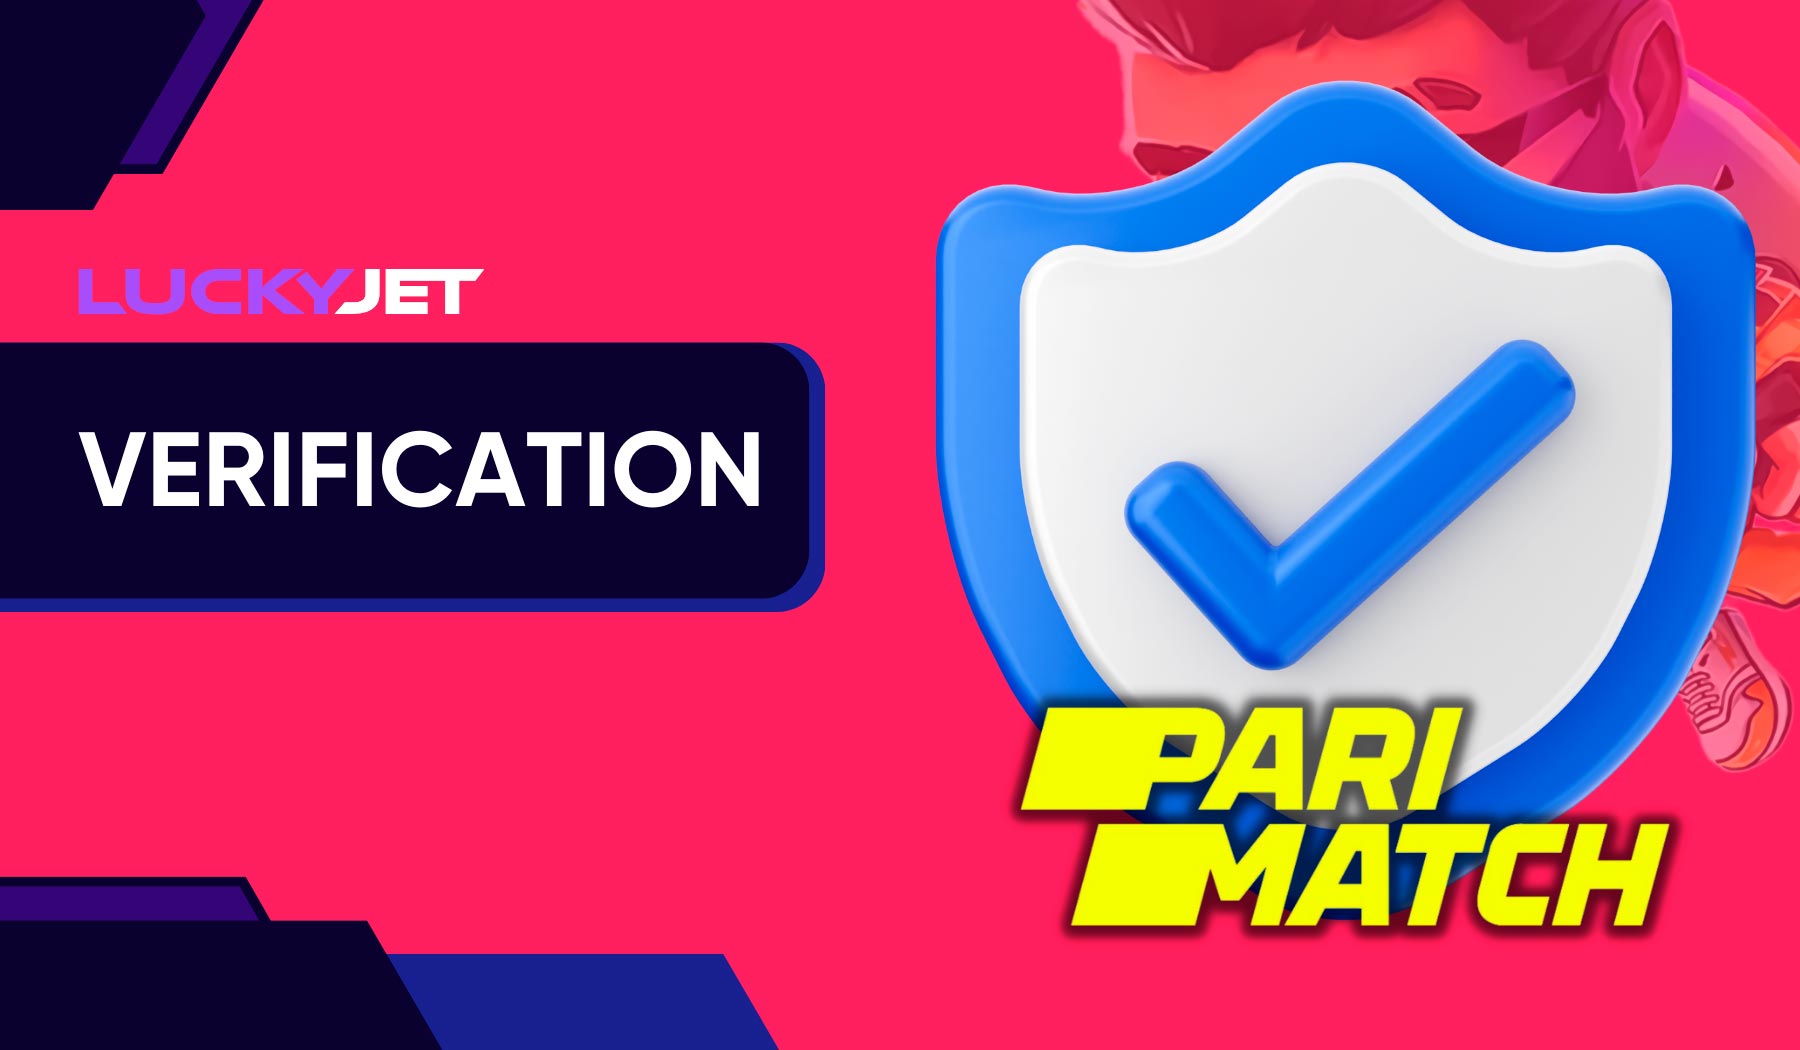 Verifying Your Account at Parimatch's Lucky Jet Crash Game